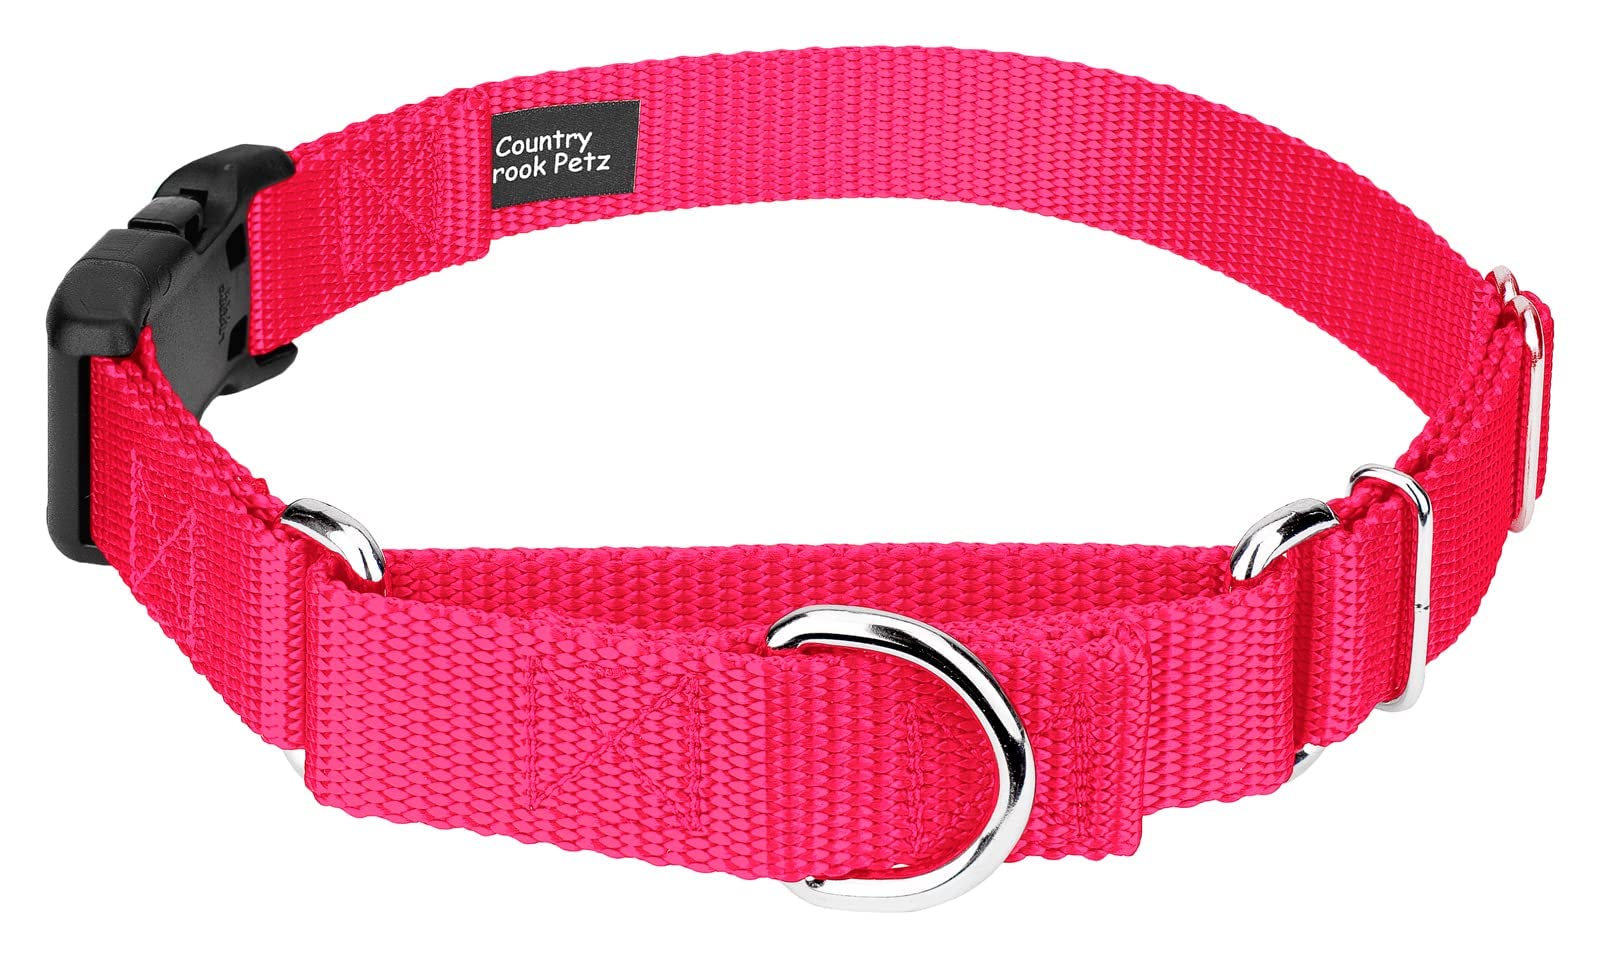 Country Brook Design country Brook Petz - Hot Pink Heavyduty Nylon Martingale with Deluxe Buckle - 30 Vibrant color Options (34 Inch, Small)